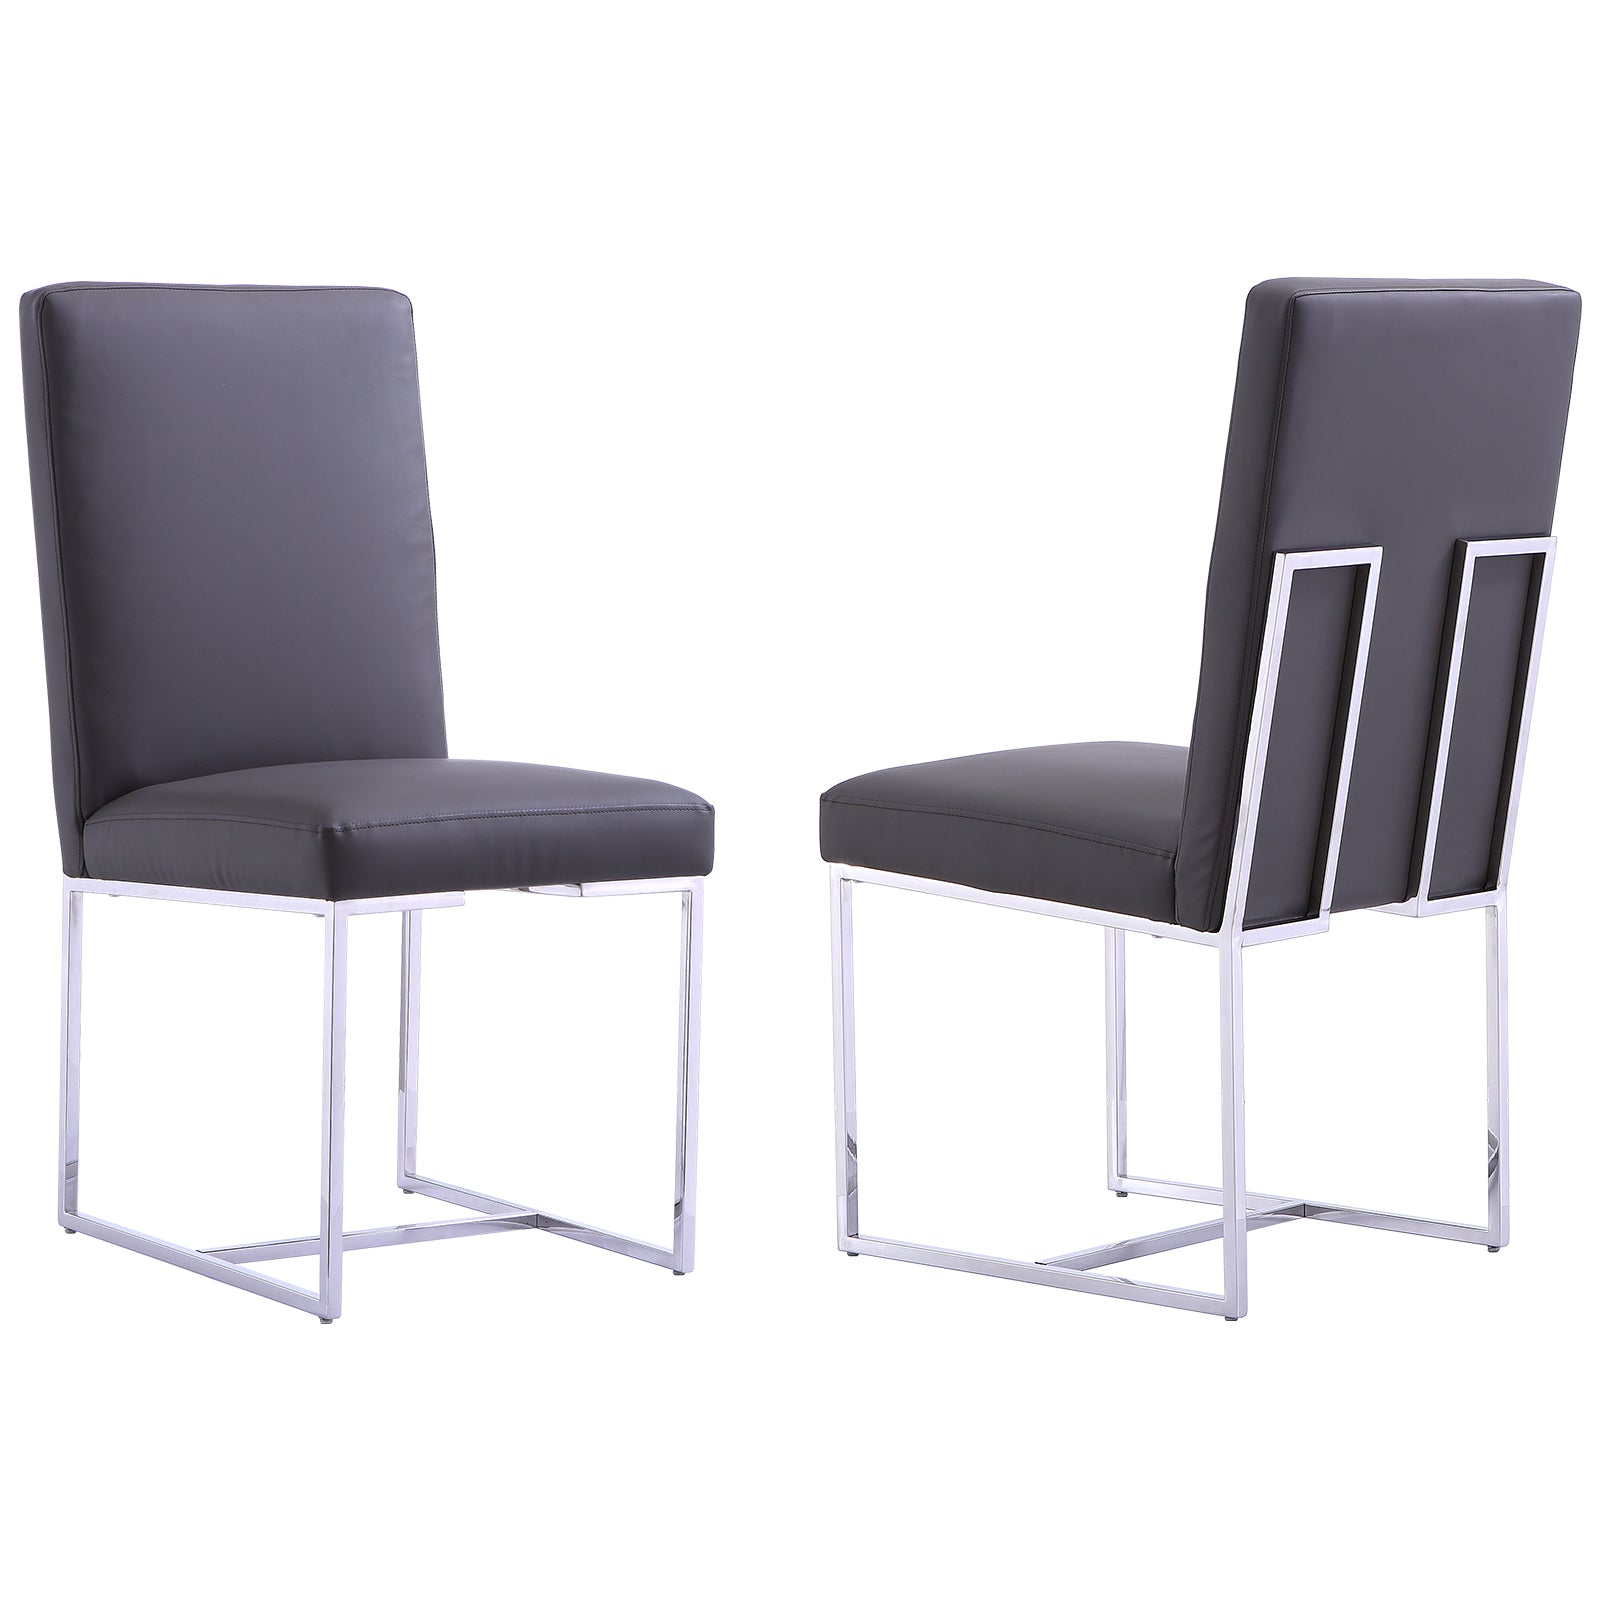 Gray leather Dining Chairs | Square backrest| Metal sled base | C145